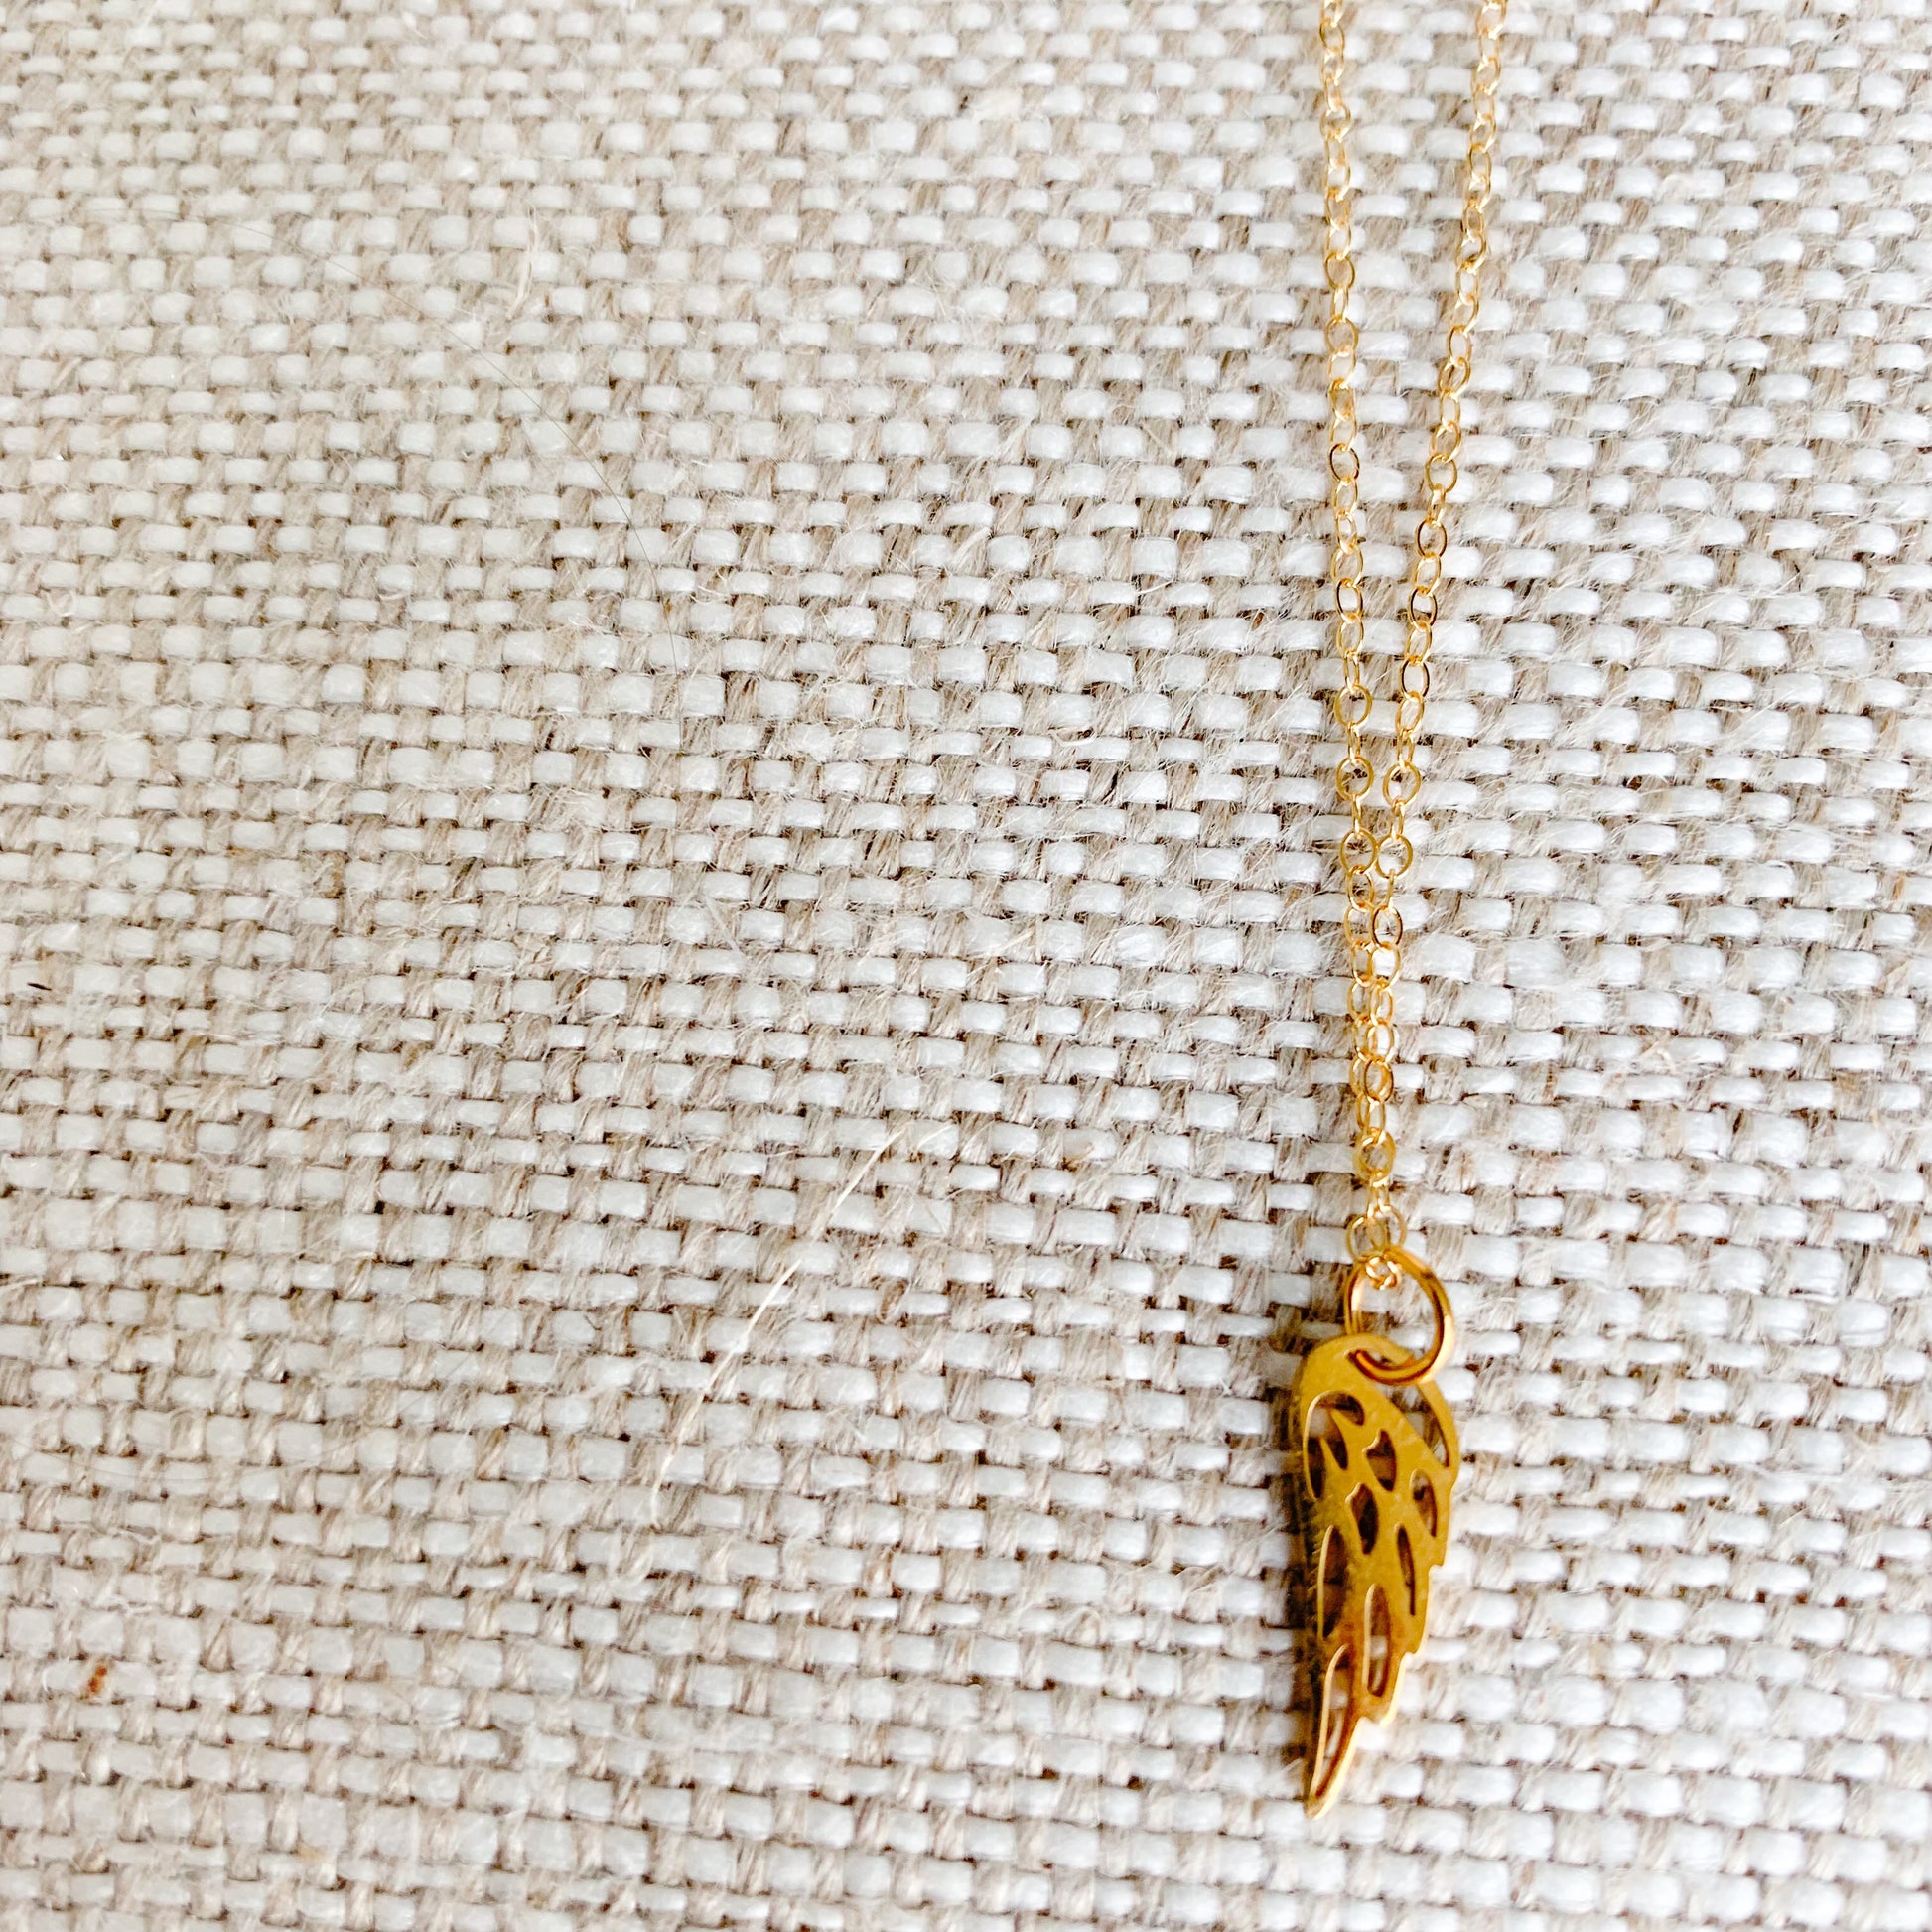 Angel Wing Necklace - BelleStyle